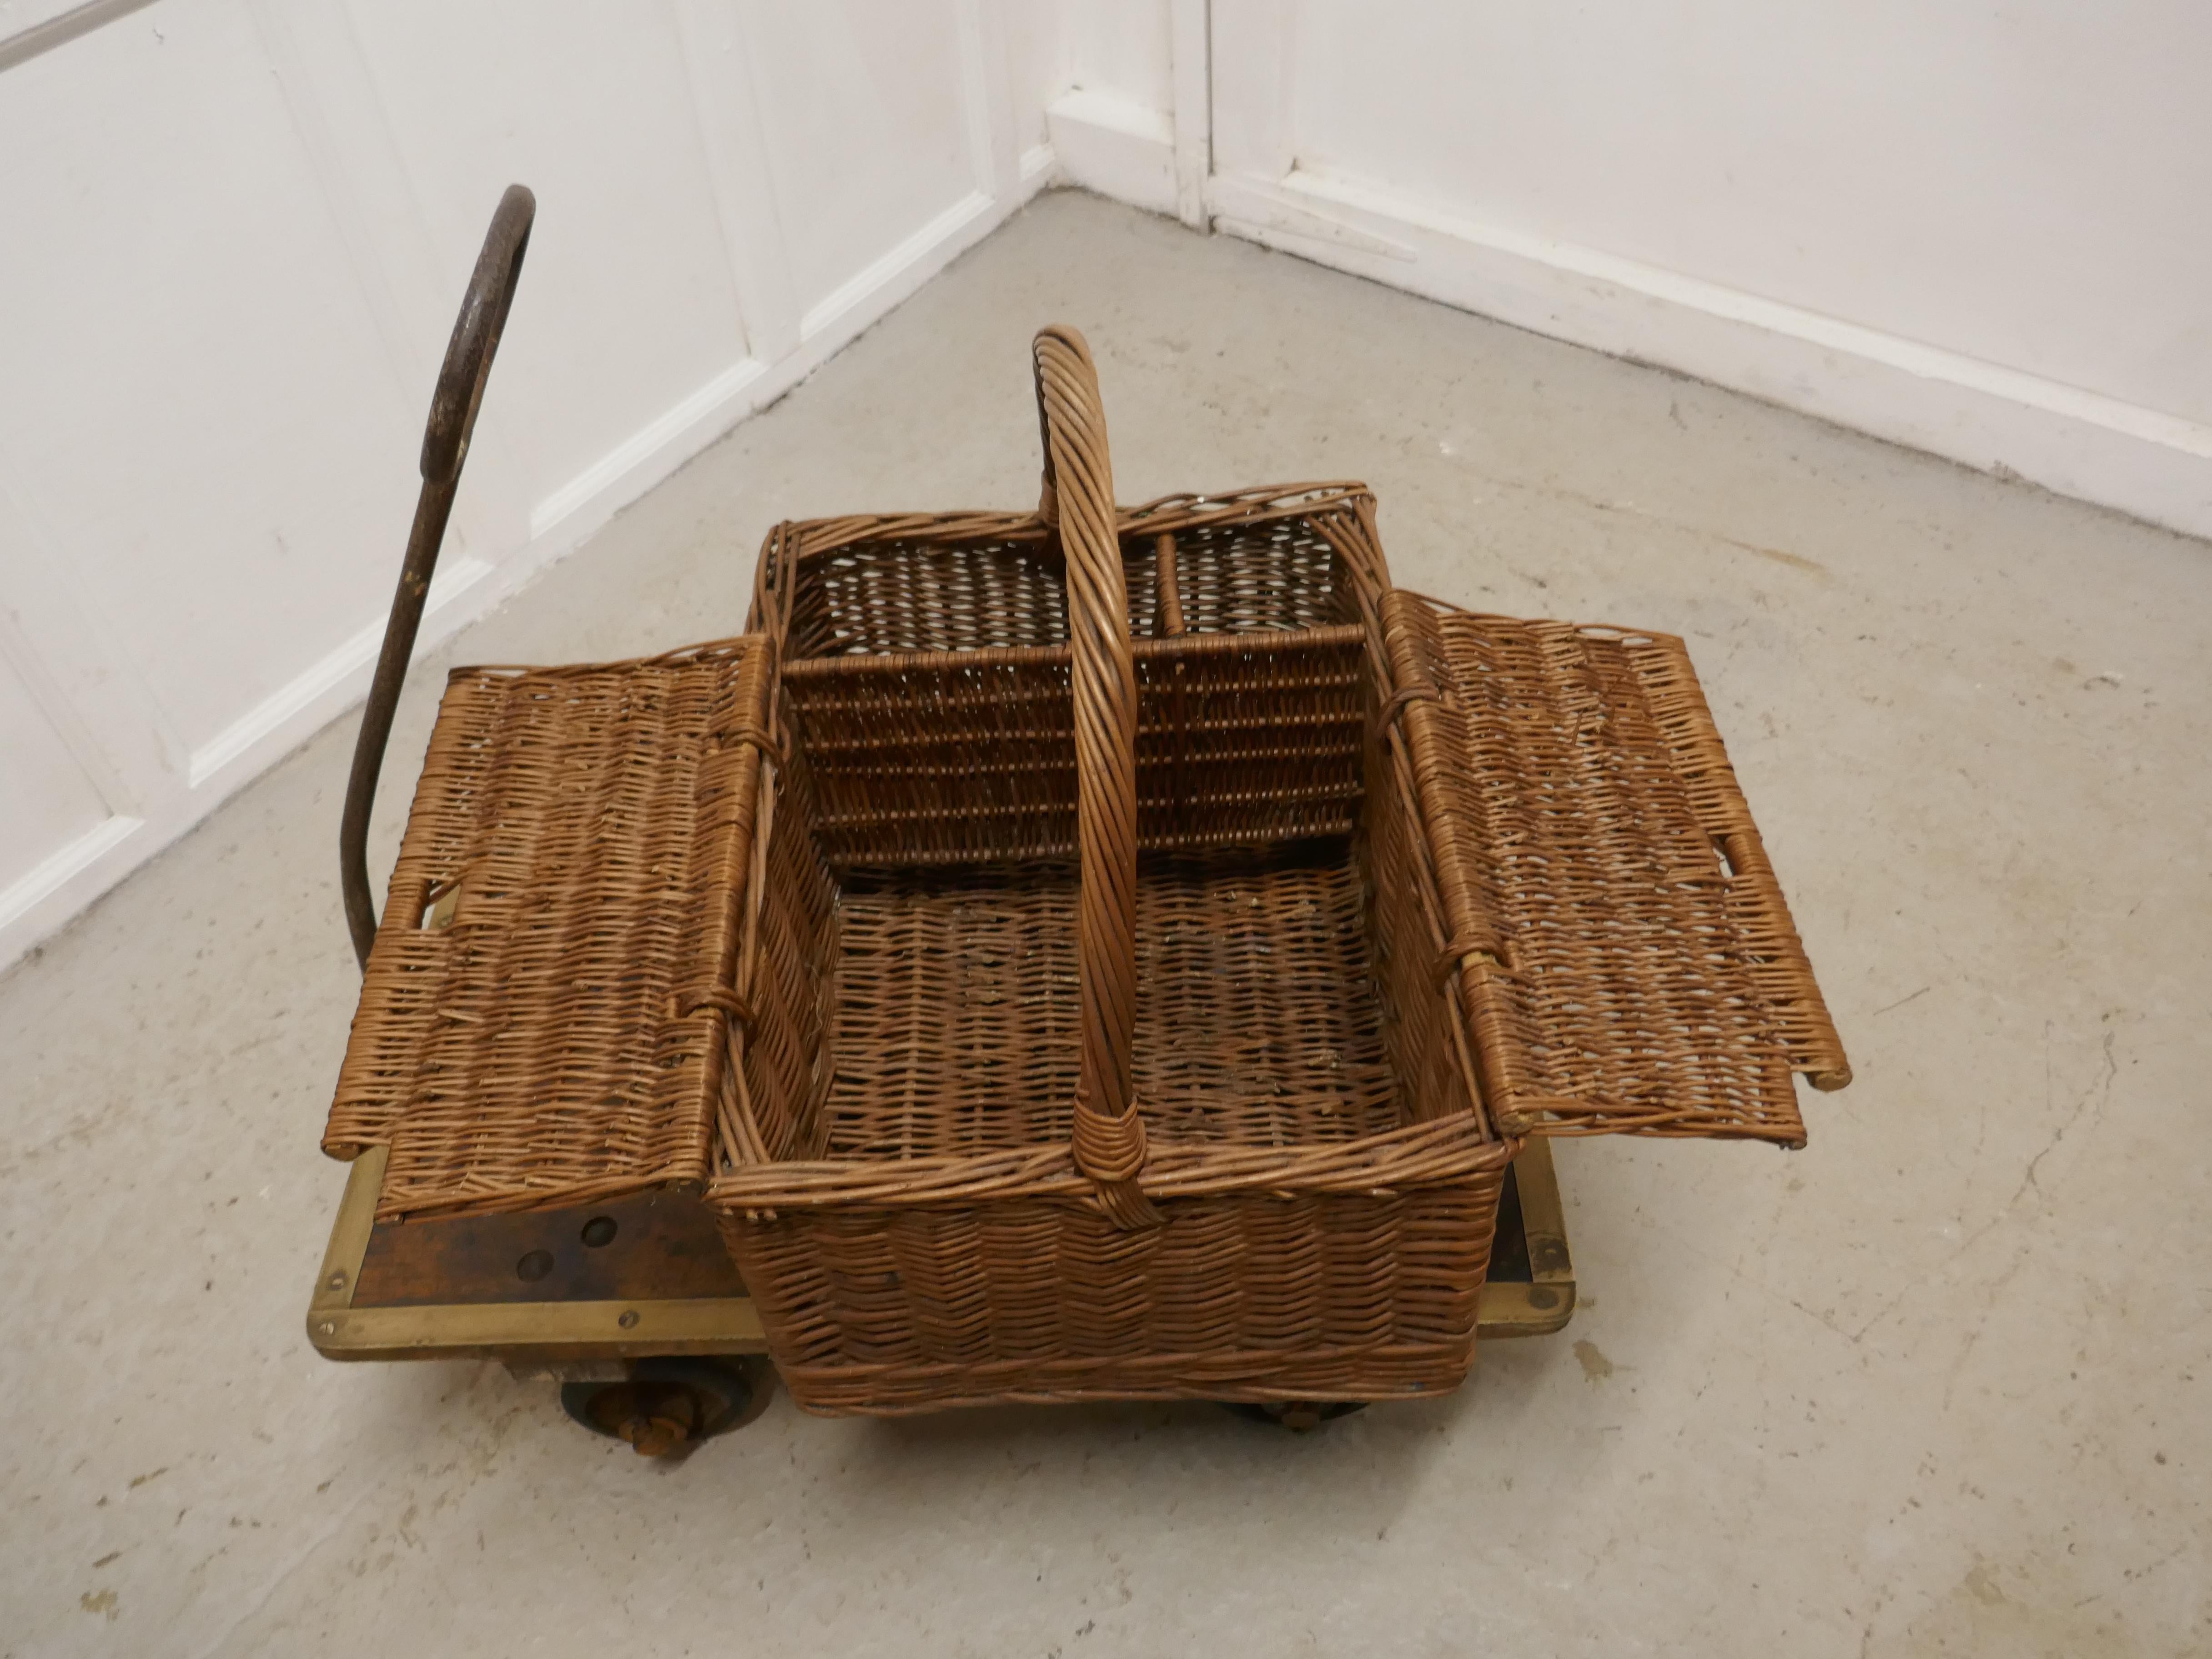 A large wicker picnic basket

An attractive age darkened wicker rectangular basket with big handle, the basket is woven and has 3 sections, the large section has a pair of lids and the open sections are for taller pieces like bottles and flasks to